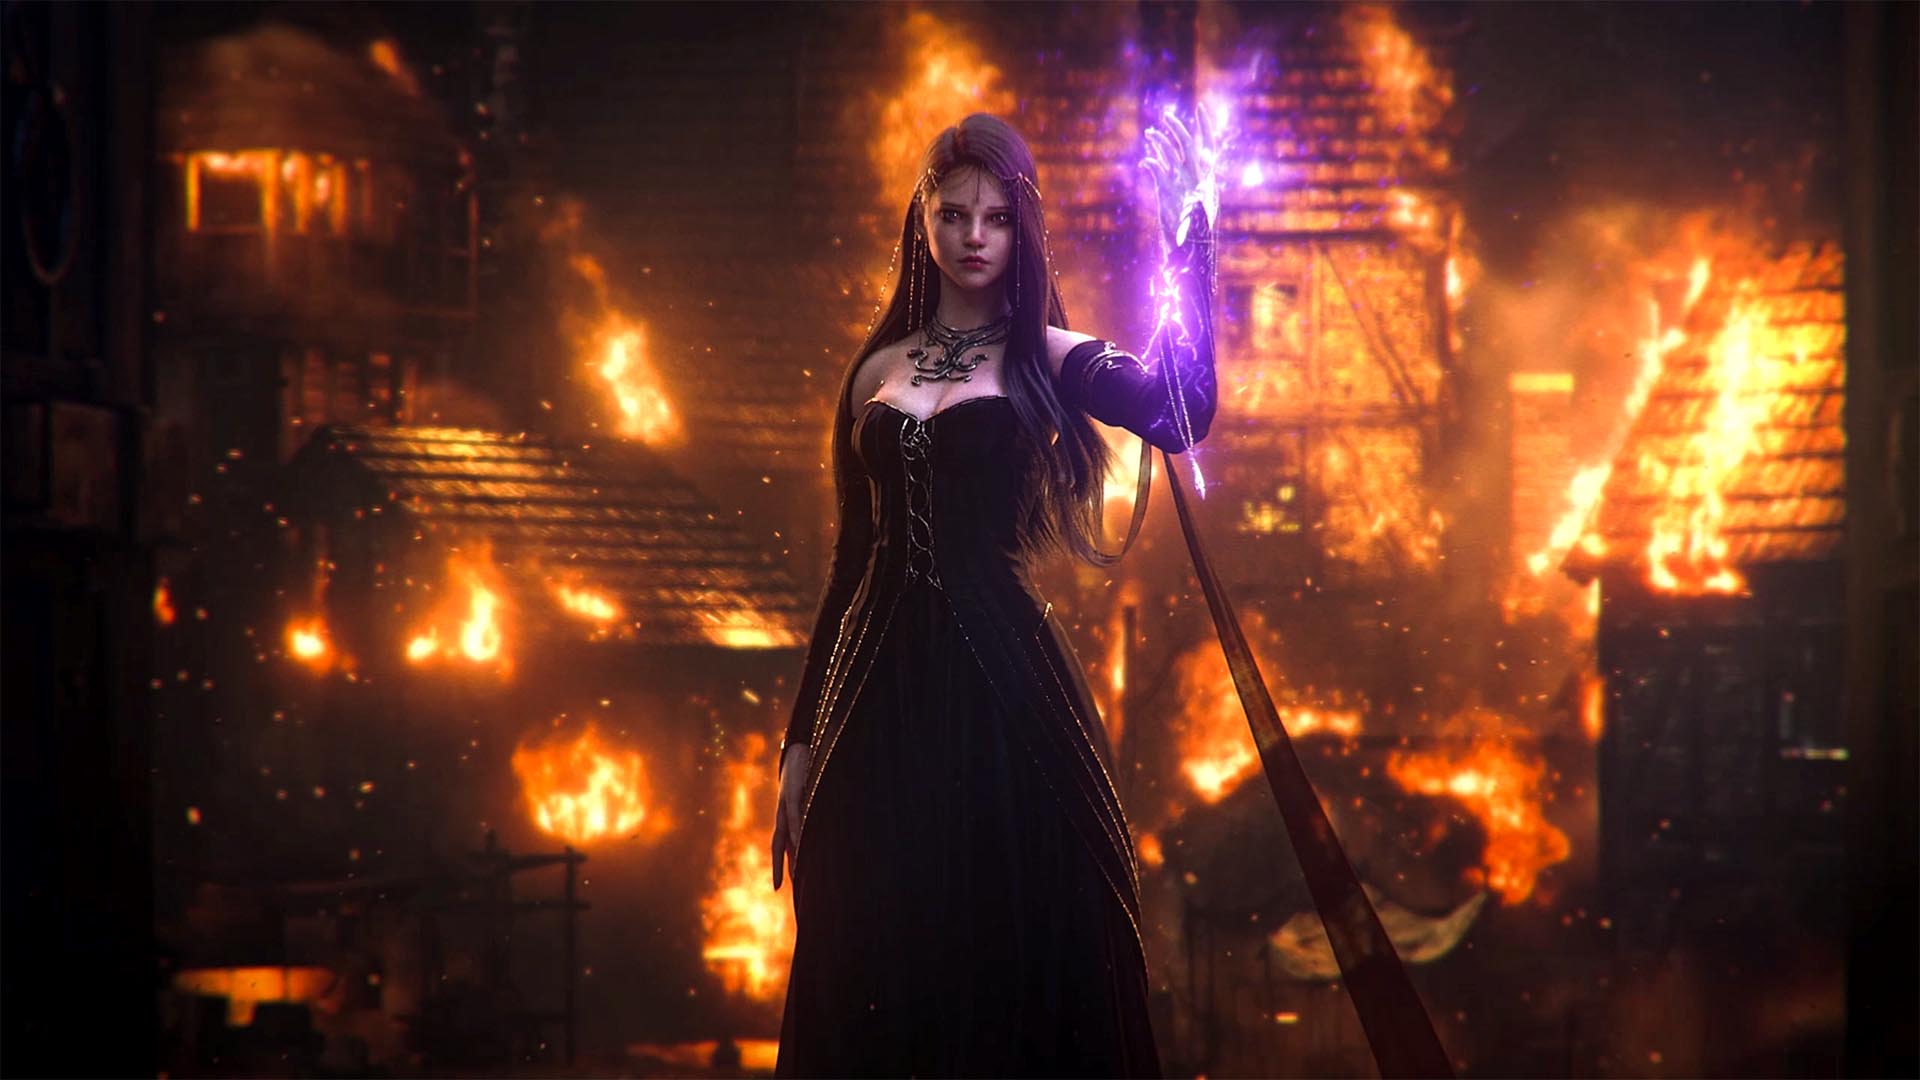 Character Calanthia stands in a black dress, long dark hair, purple light glows from her hand, a town burns behind her